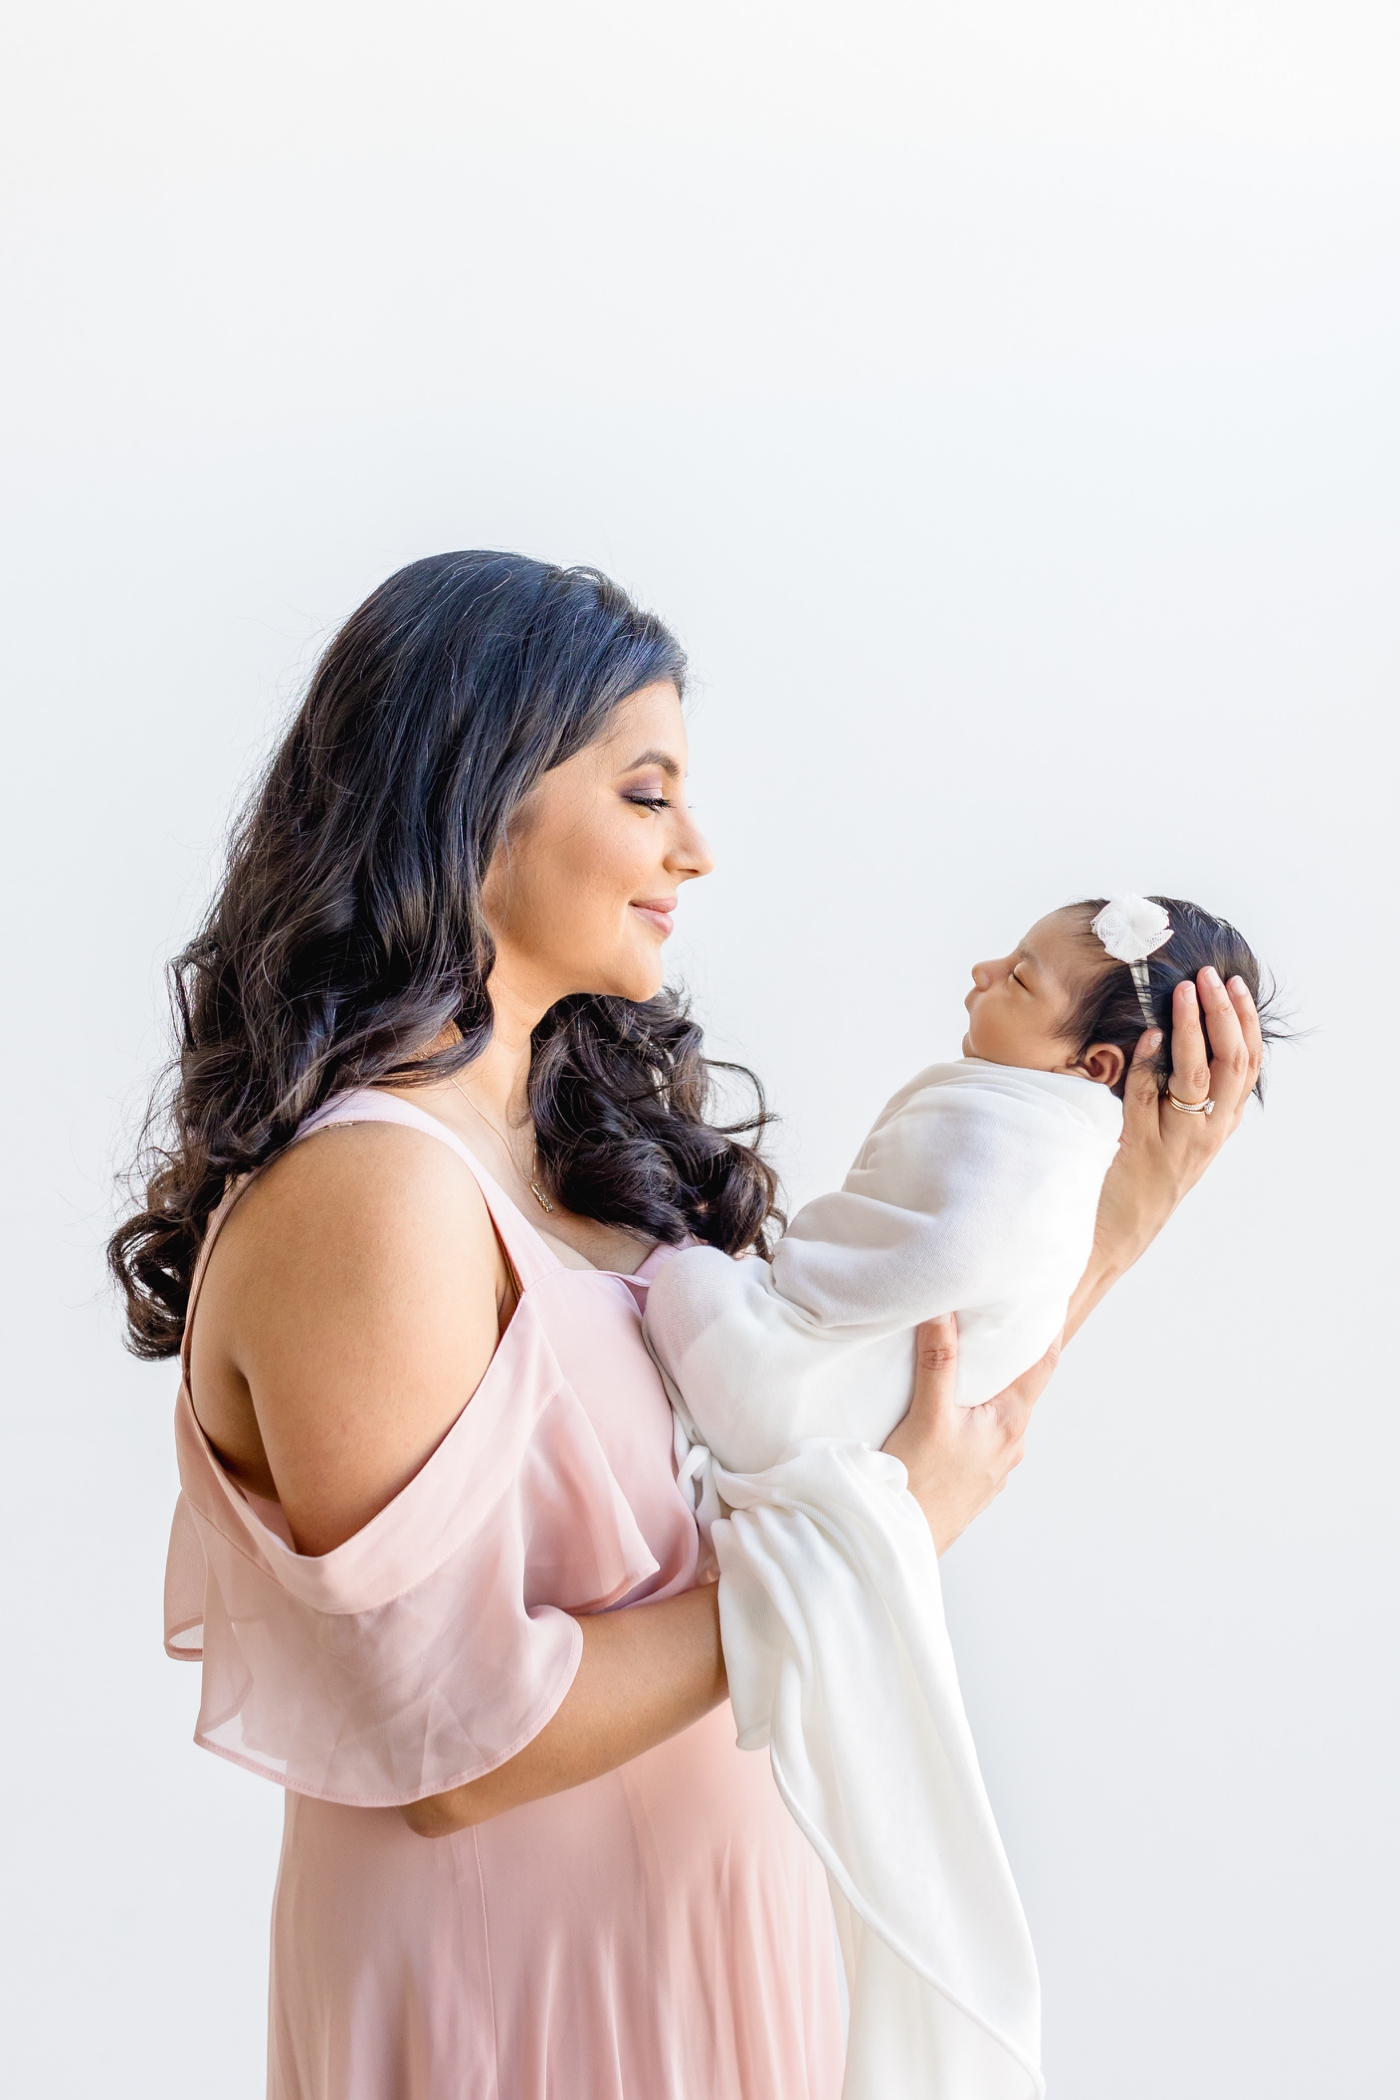 Mom looking at baby girl during newborn session with Sana Ahmed Photography.